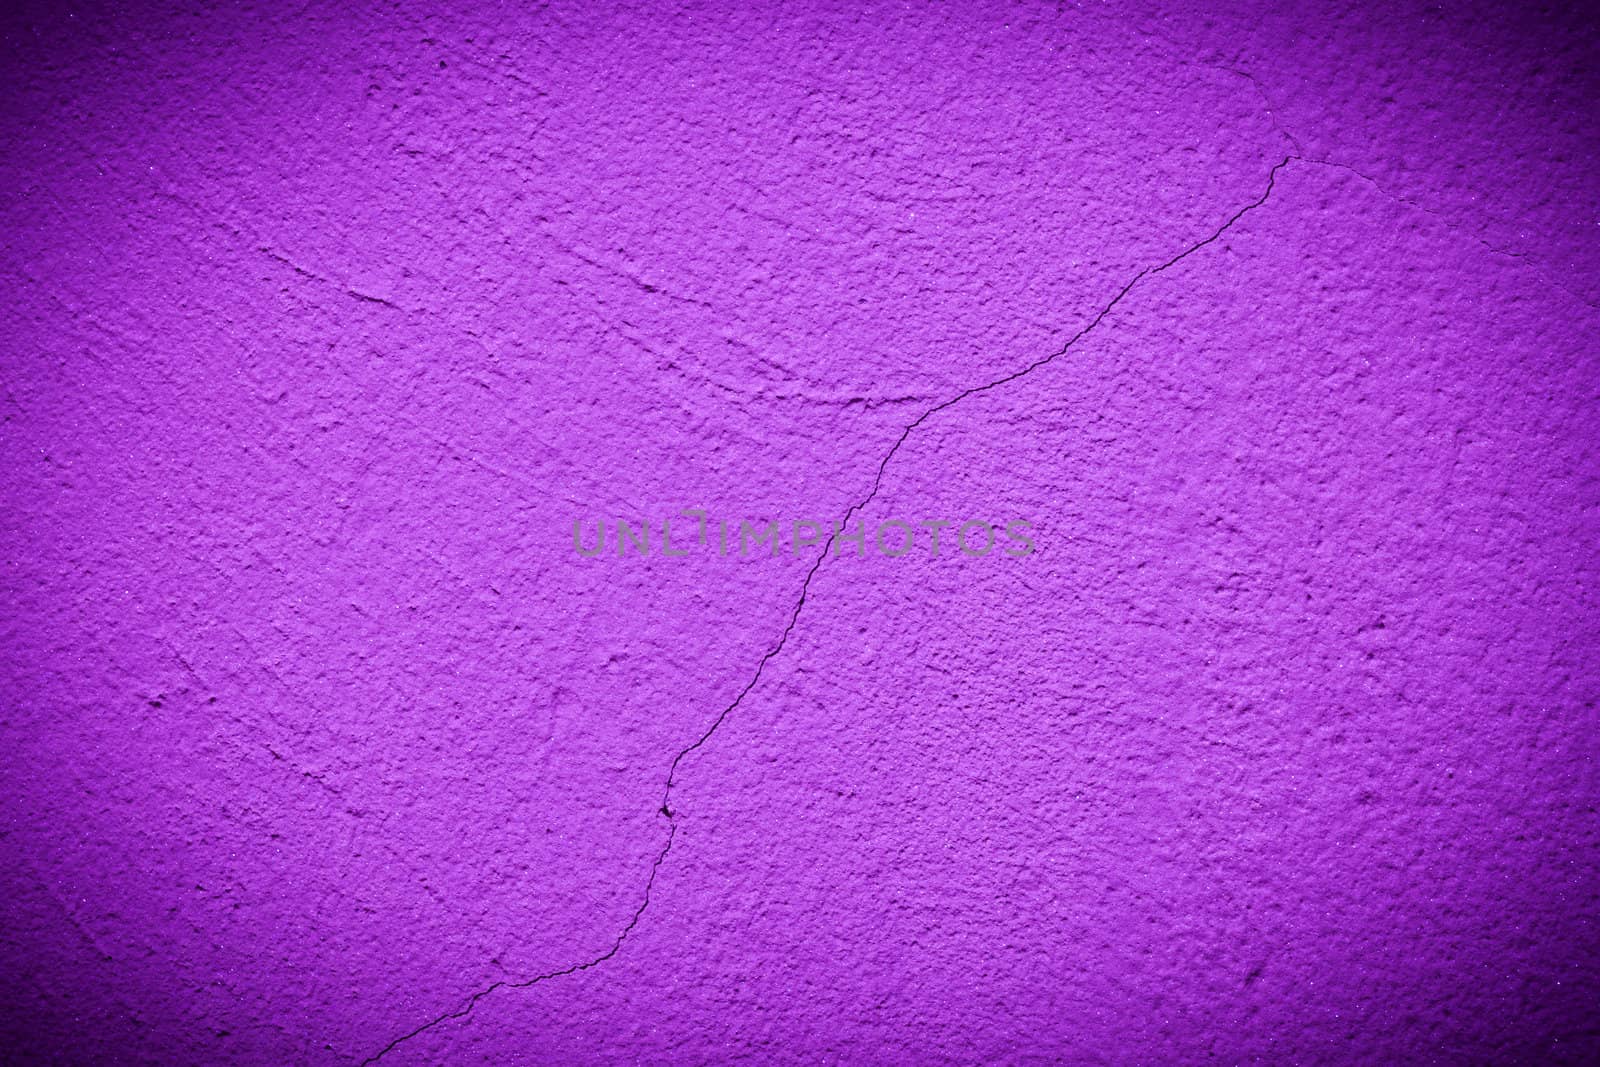 Cracked pink backdrop surface texture